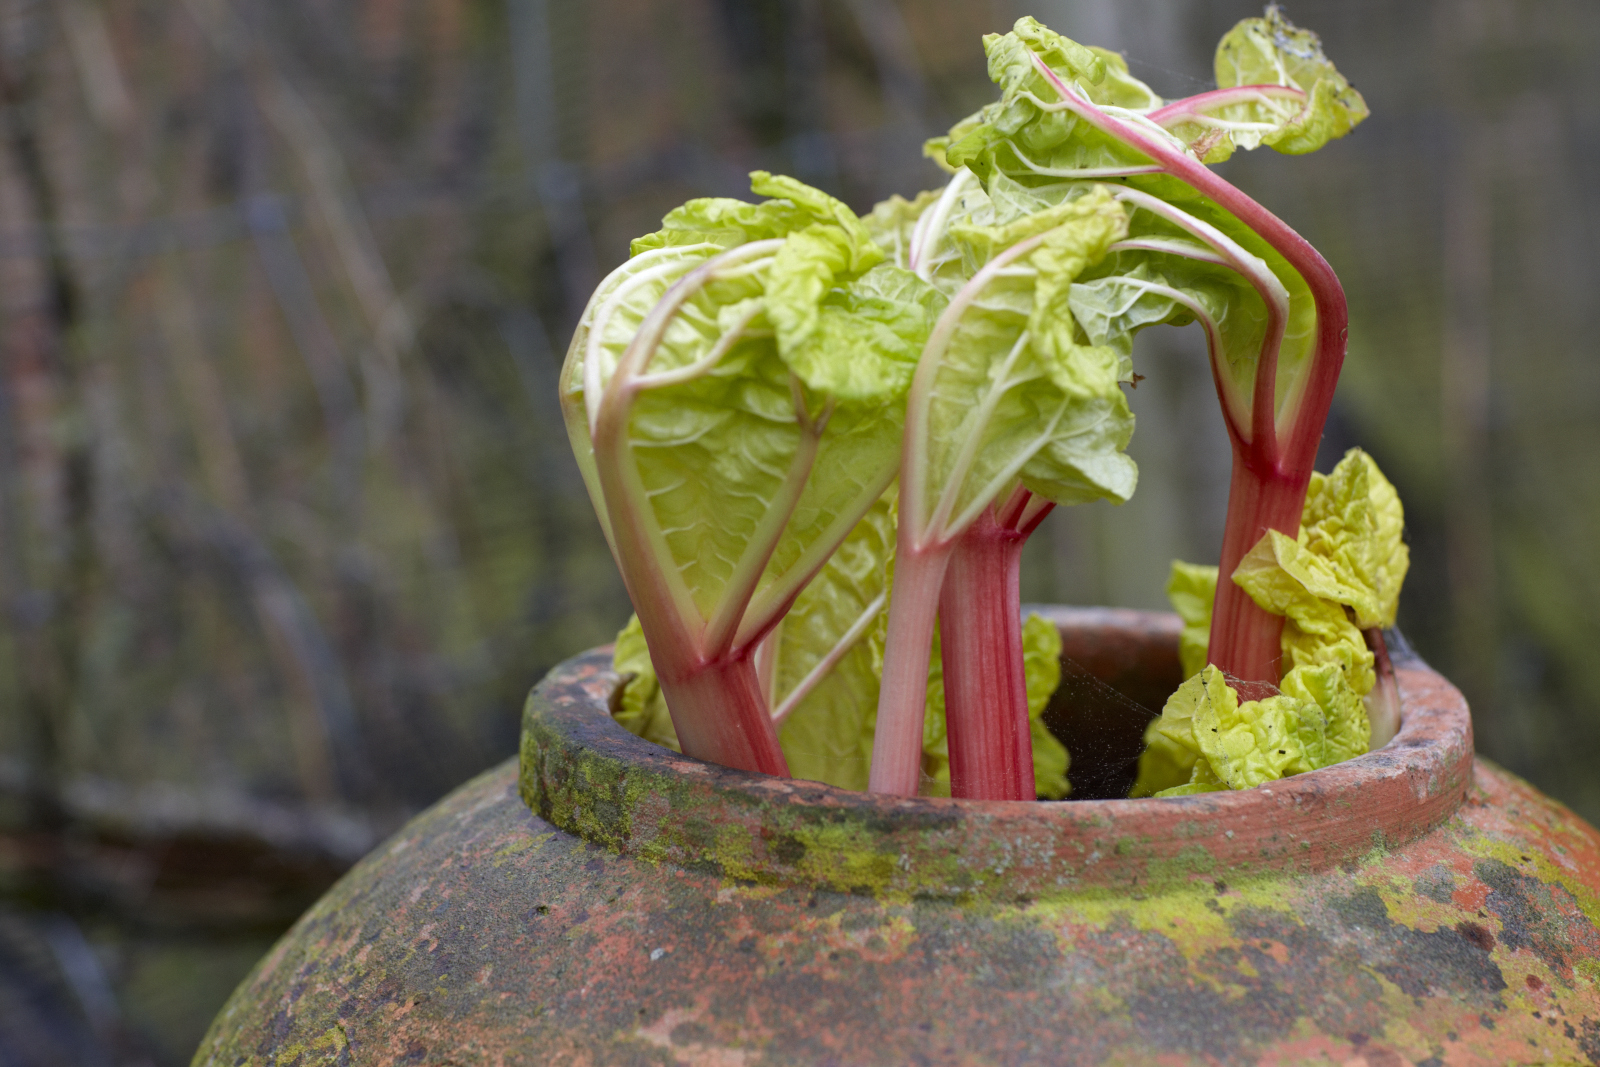 Green rhubarb leaves and pink stems poking out of a traditional terracotta jar.